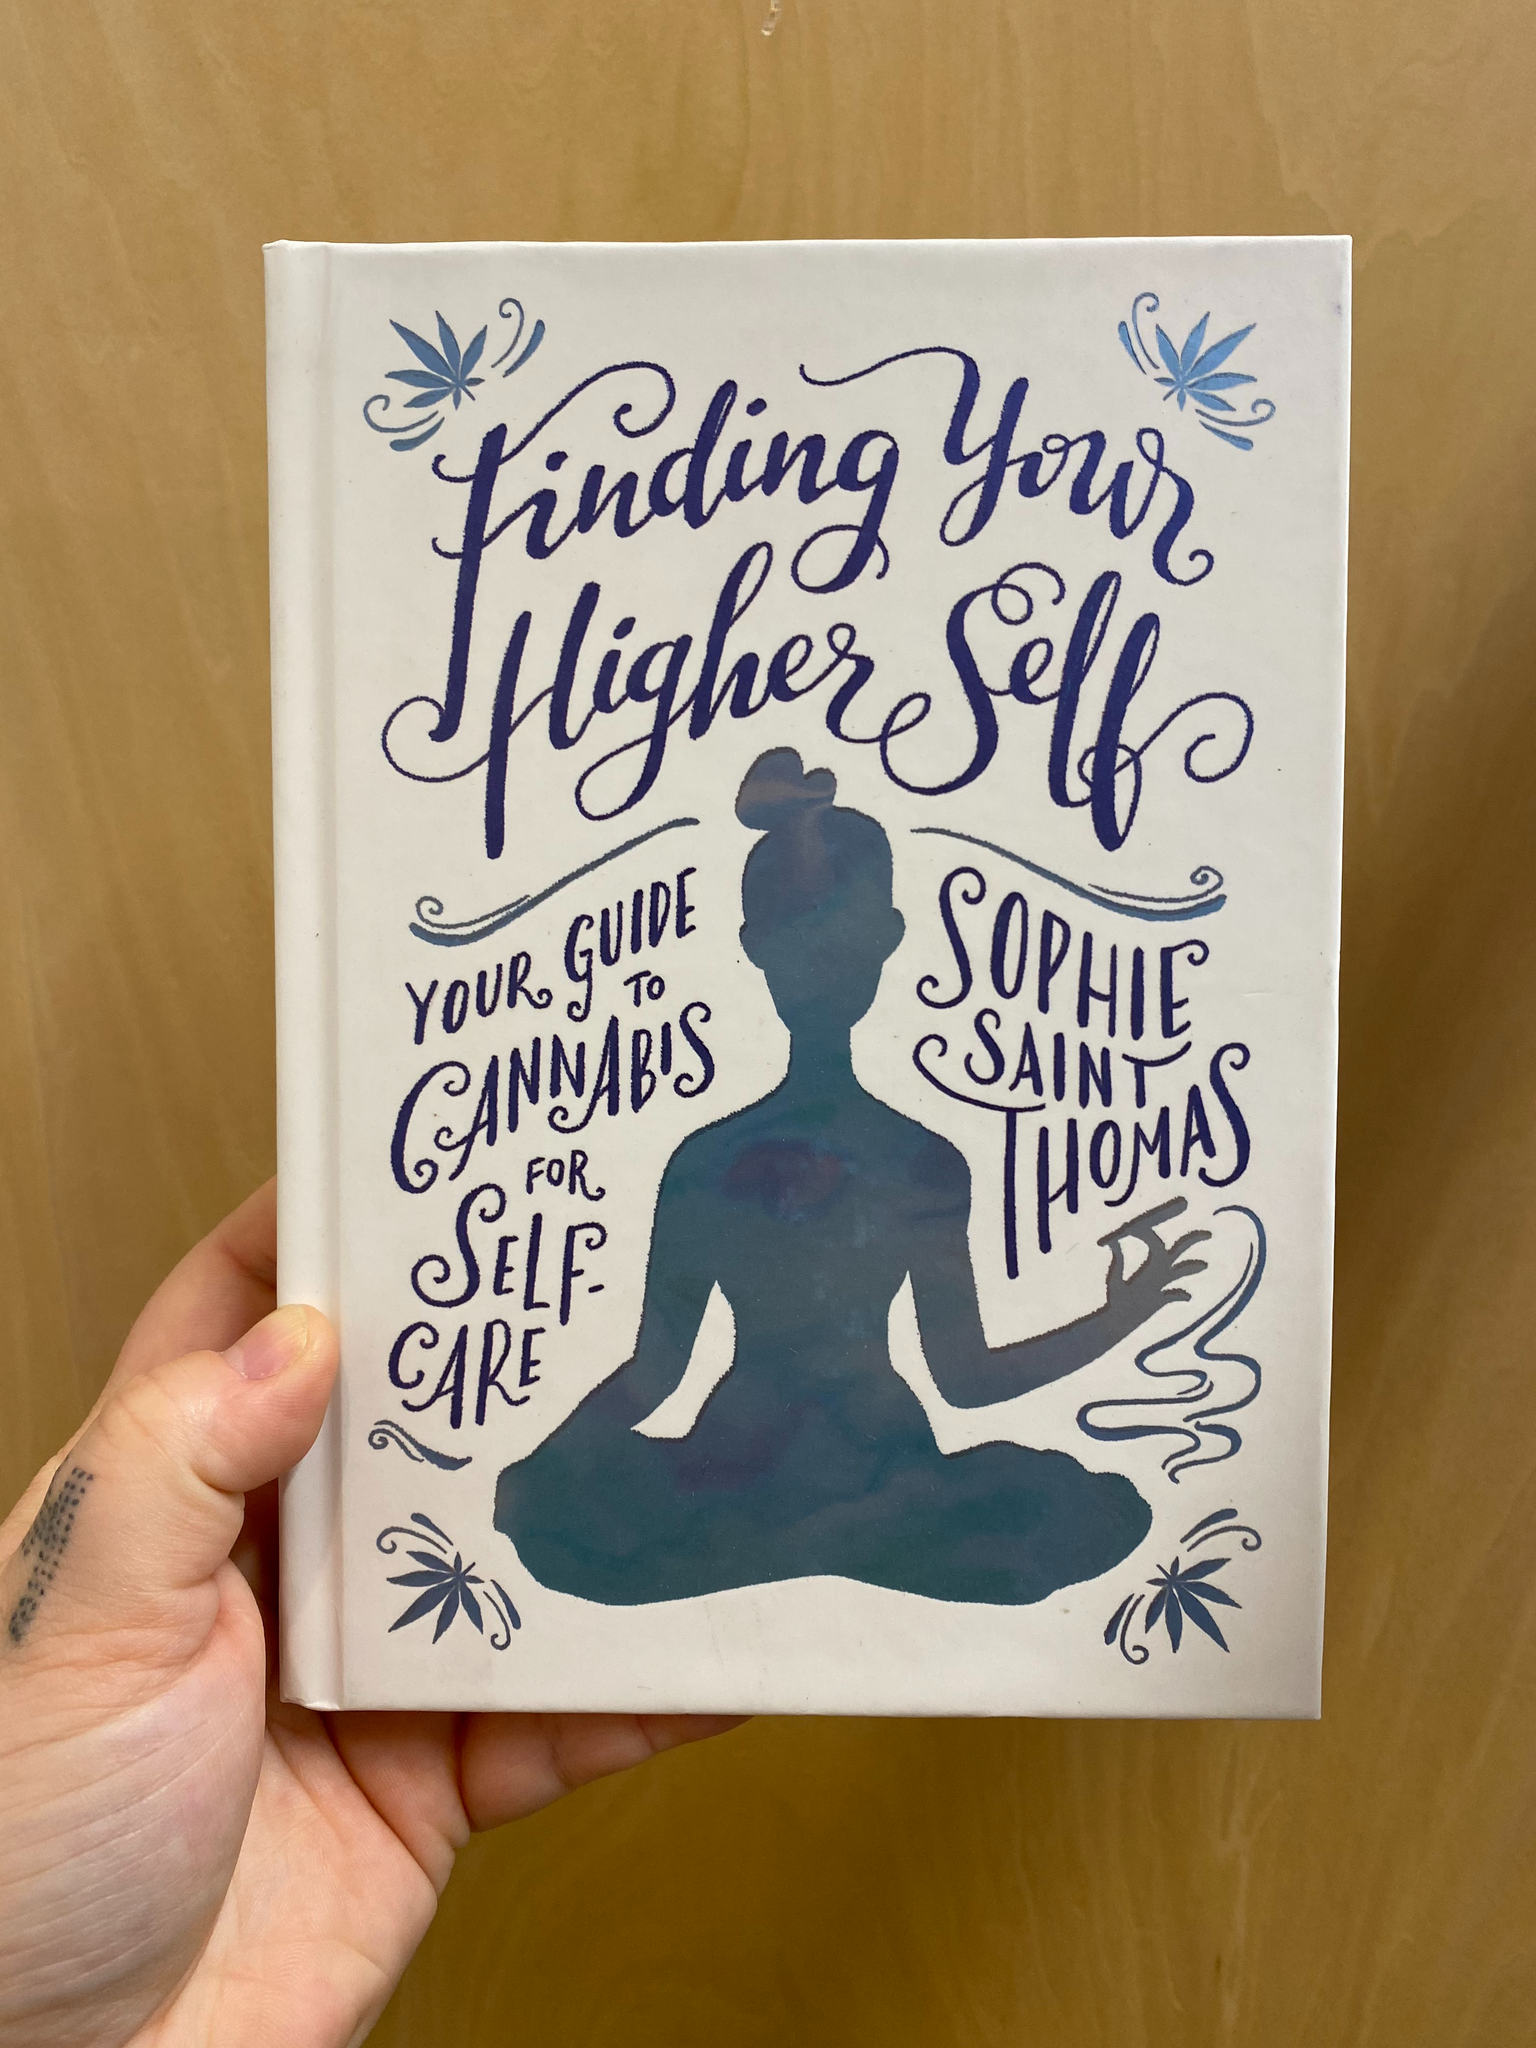 Finding Your Higher Self - Your Guide to Cannabis Self Care